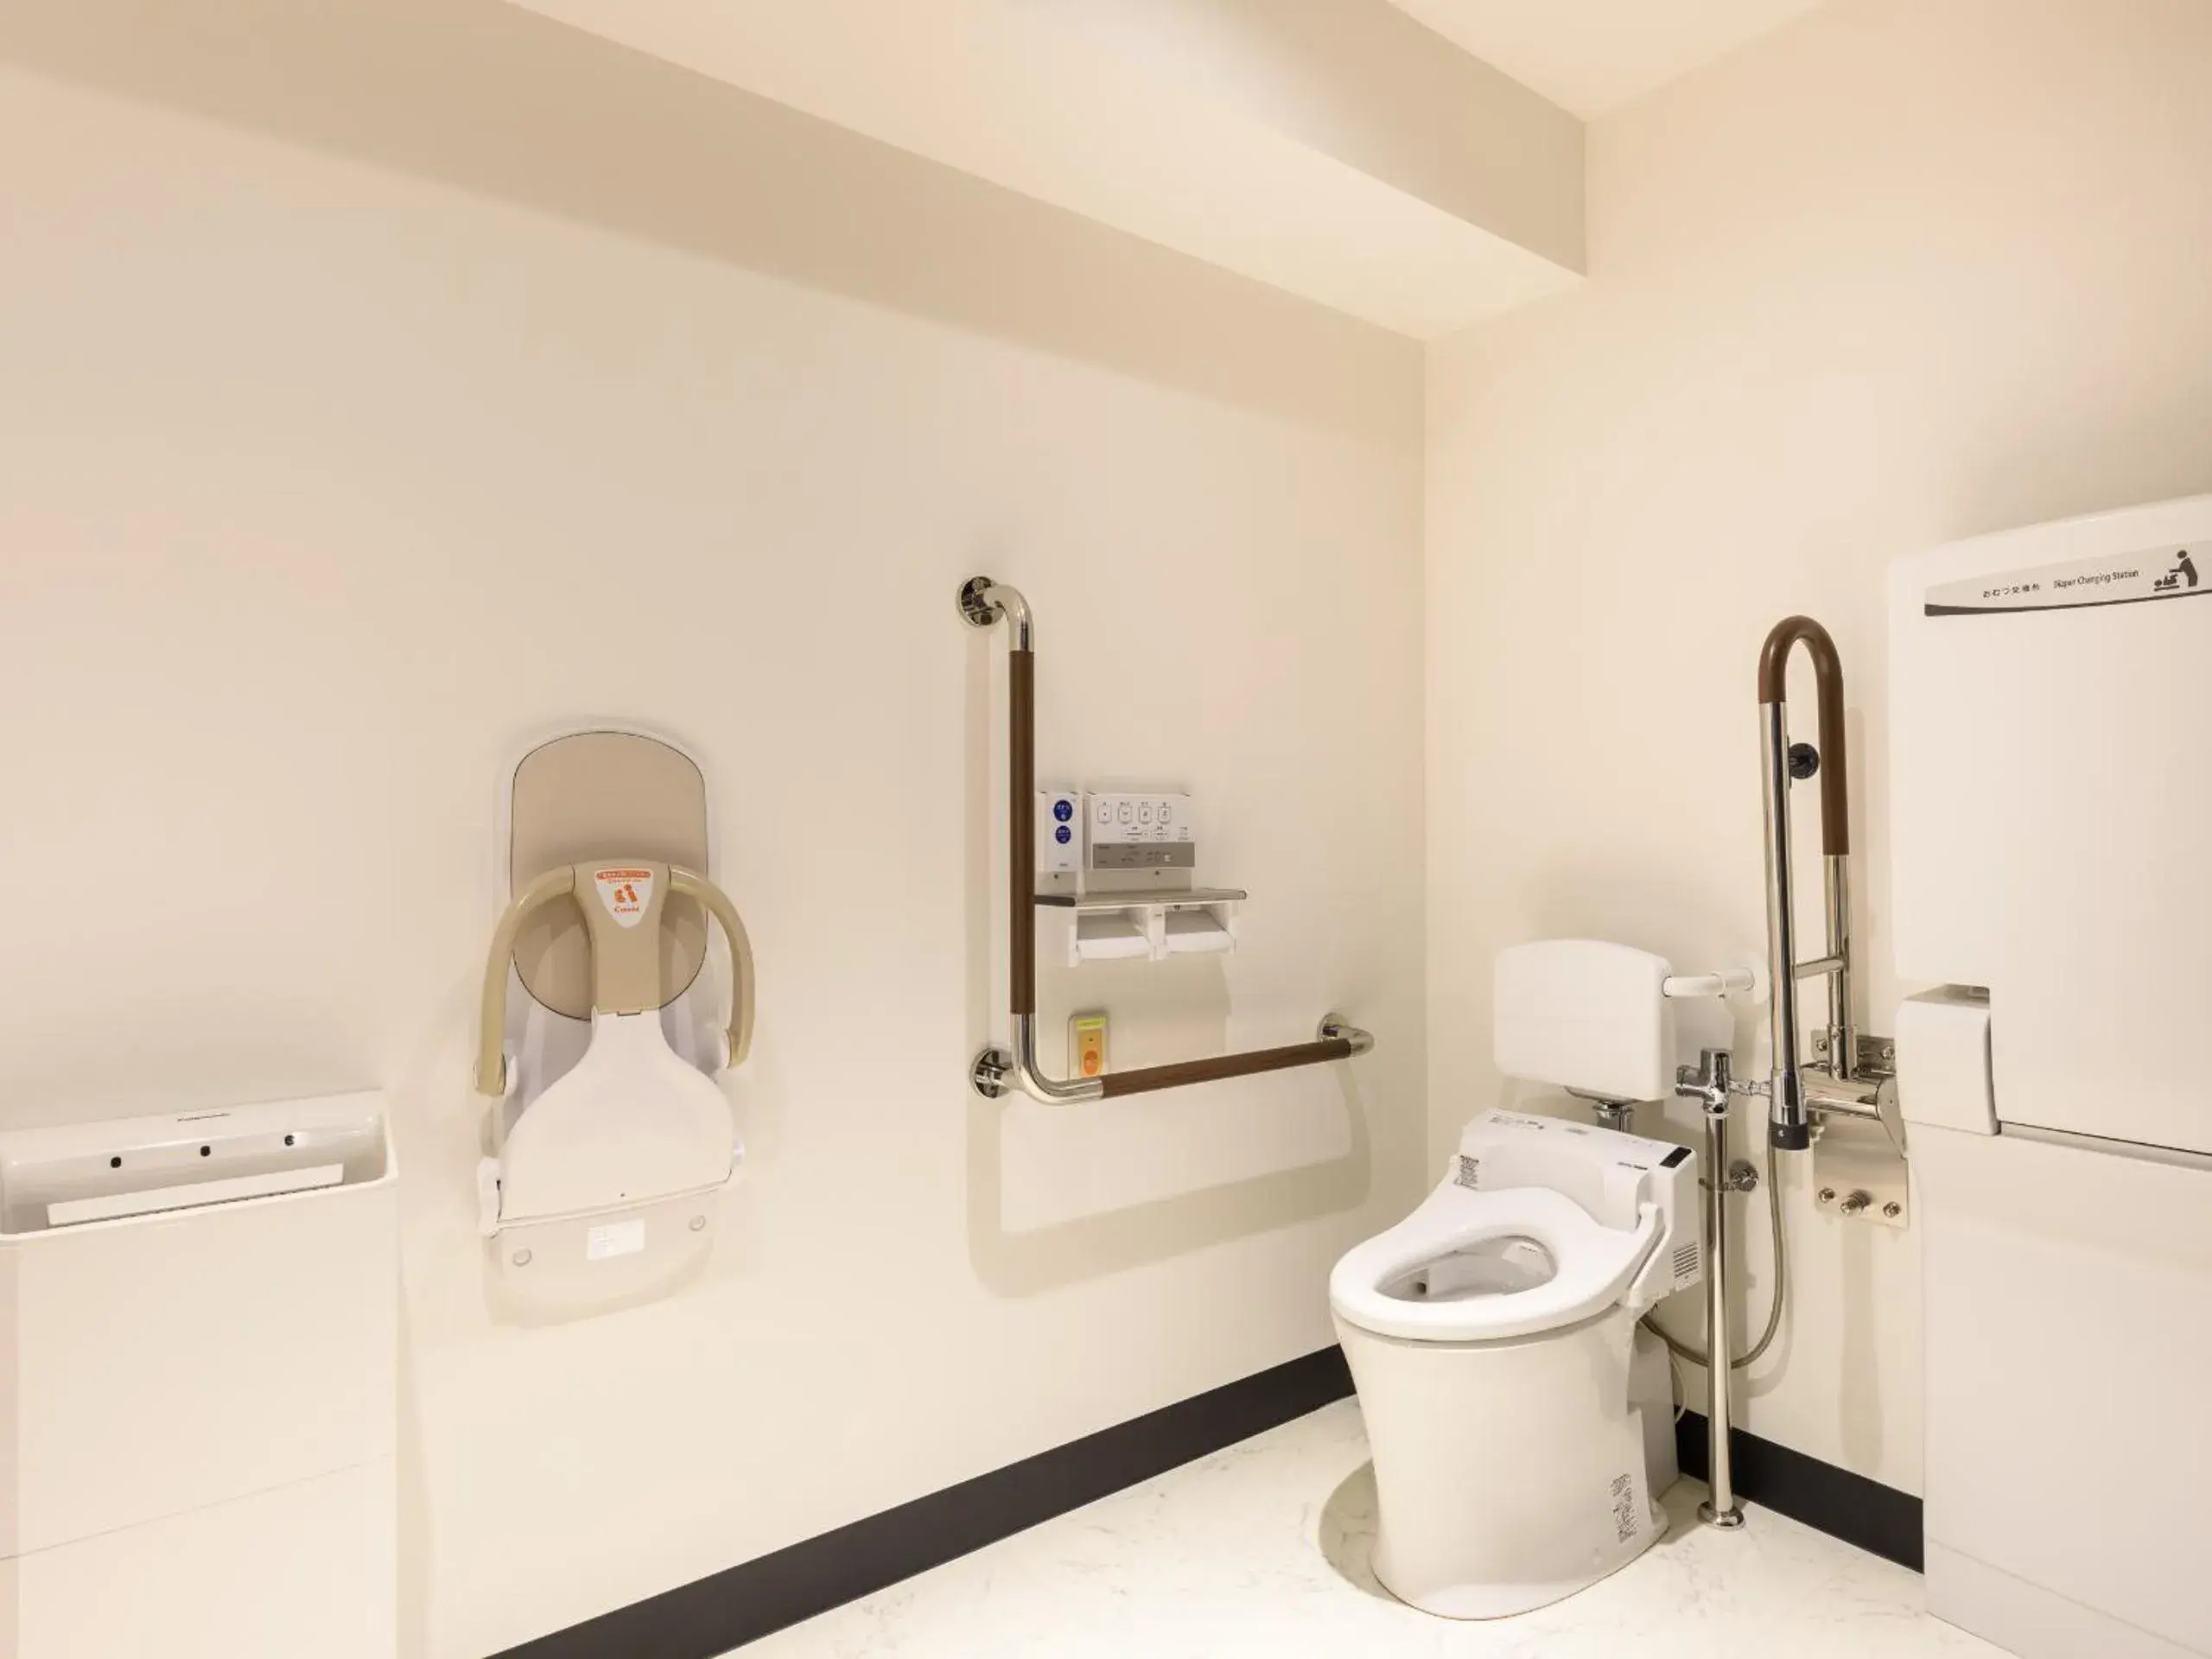 Facility for disabled guests, Bathroom in APA Hotel Hatchobori Shintomicho